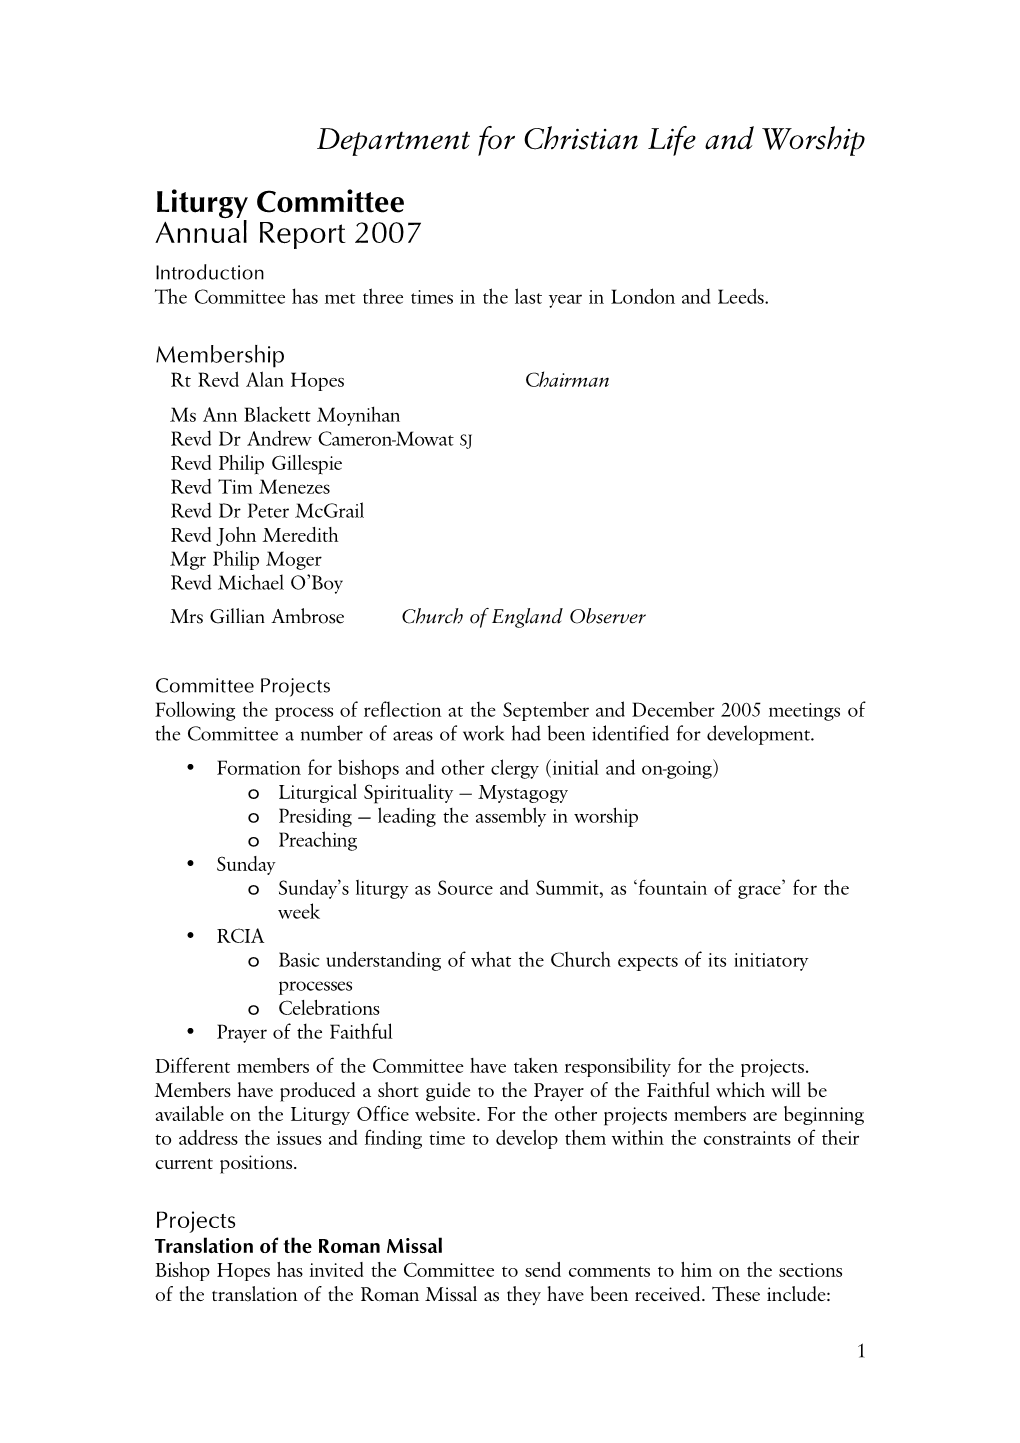 Department for Christian Life and Worship Liturgy Committee Annual Report 2007